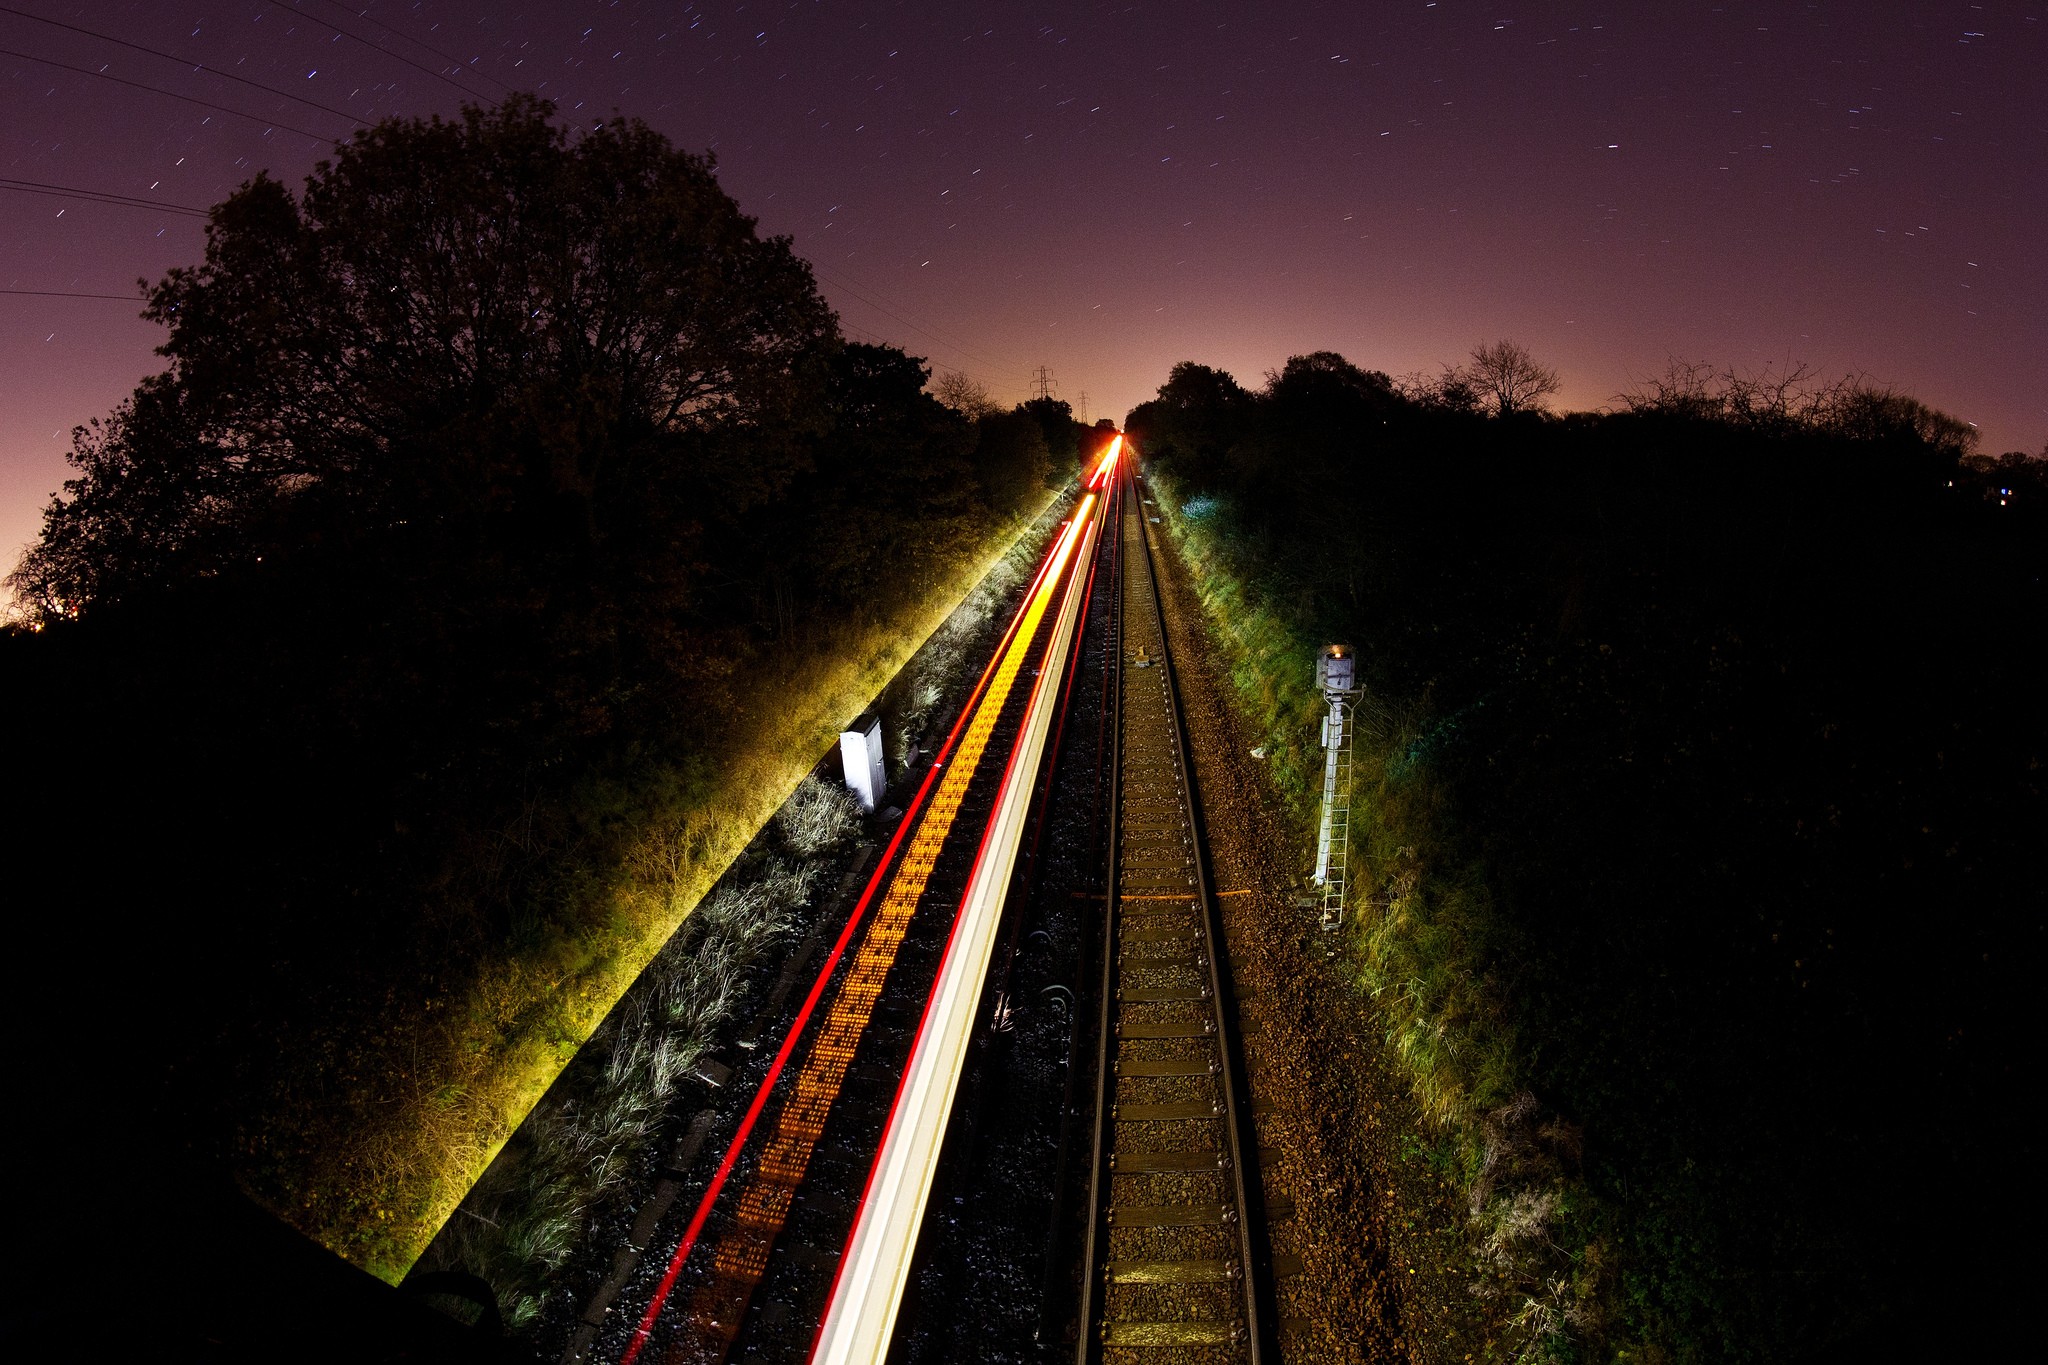 General 2048x1365 long exposure train photography light trails